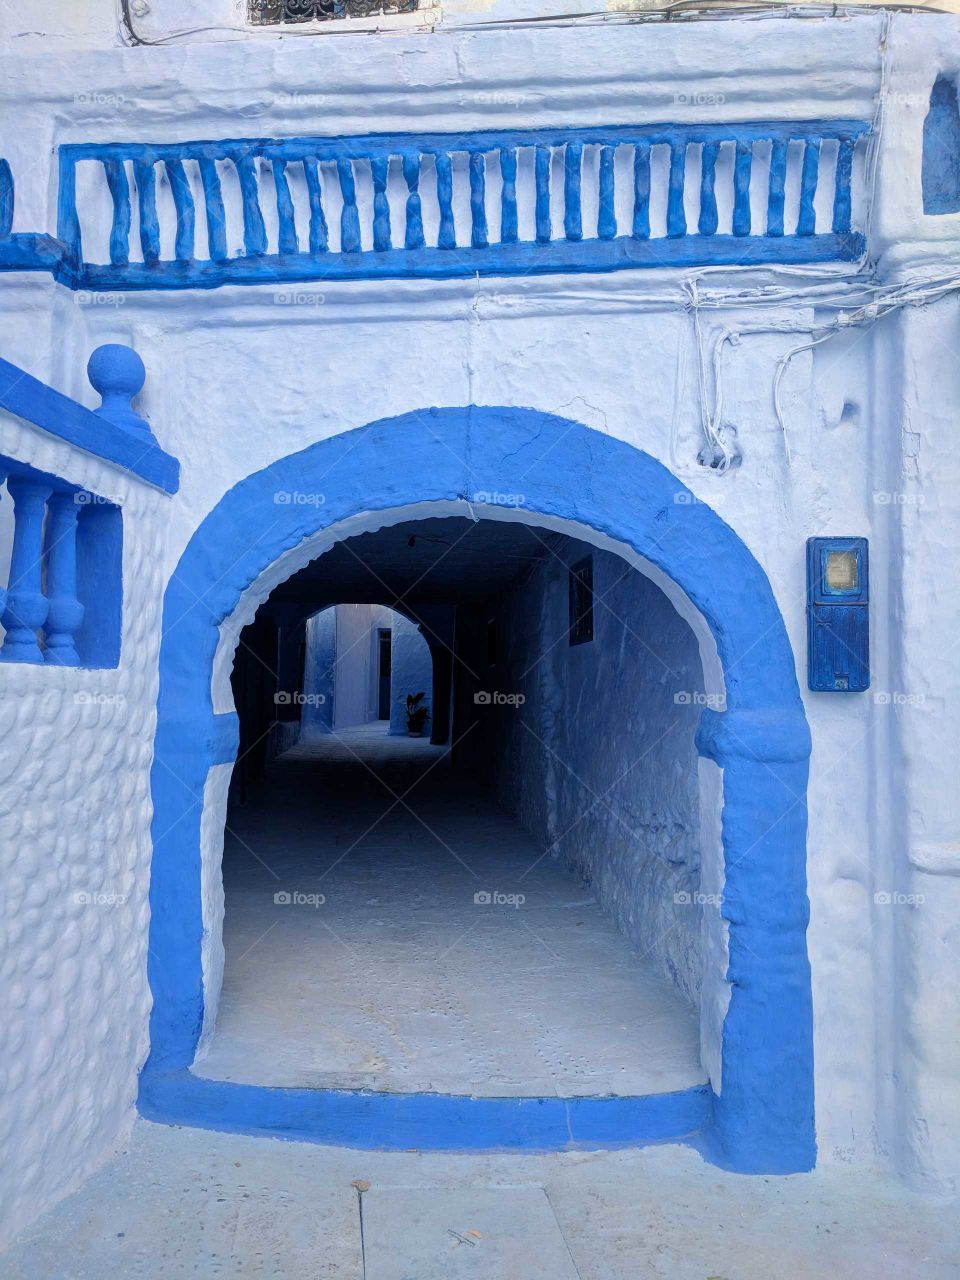 Chefchaouen painted cool blue arch/doorway